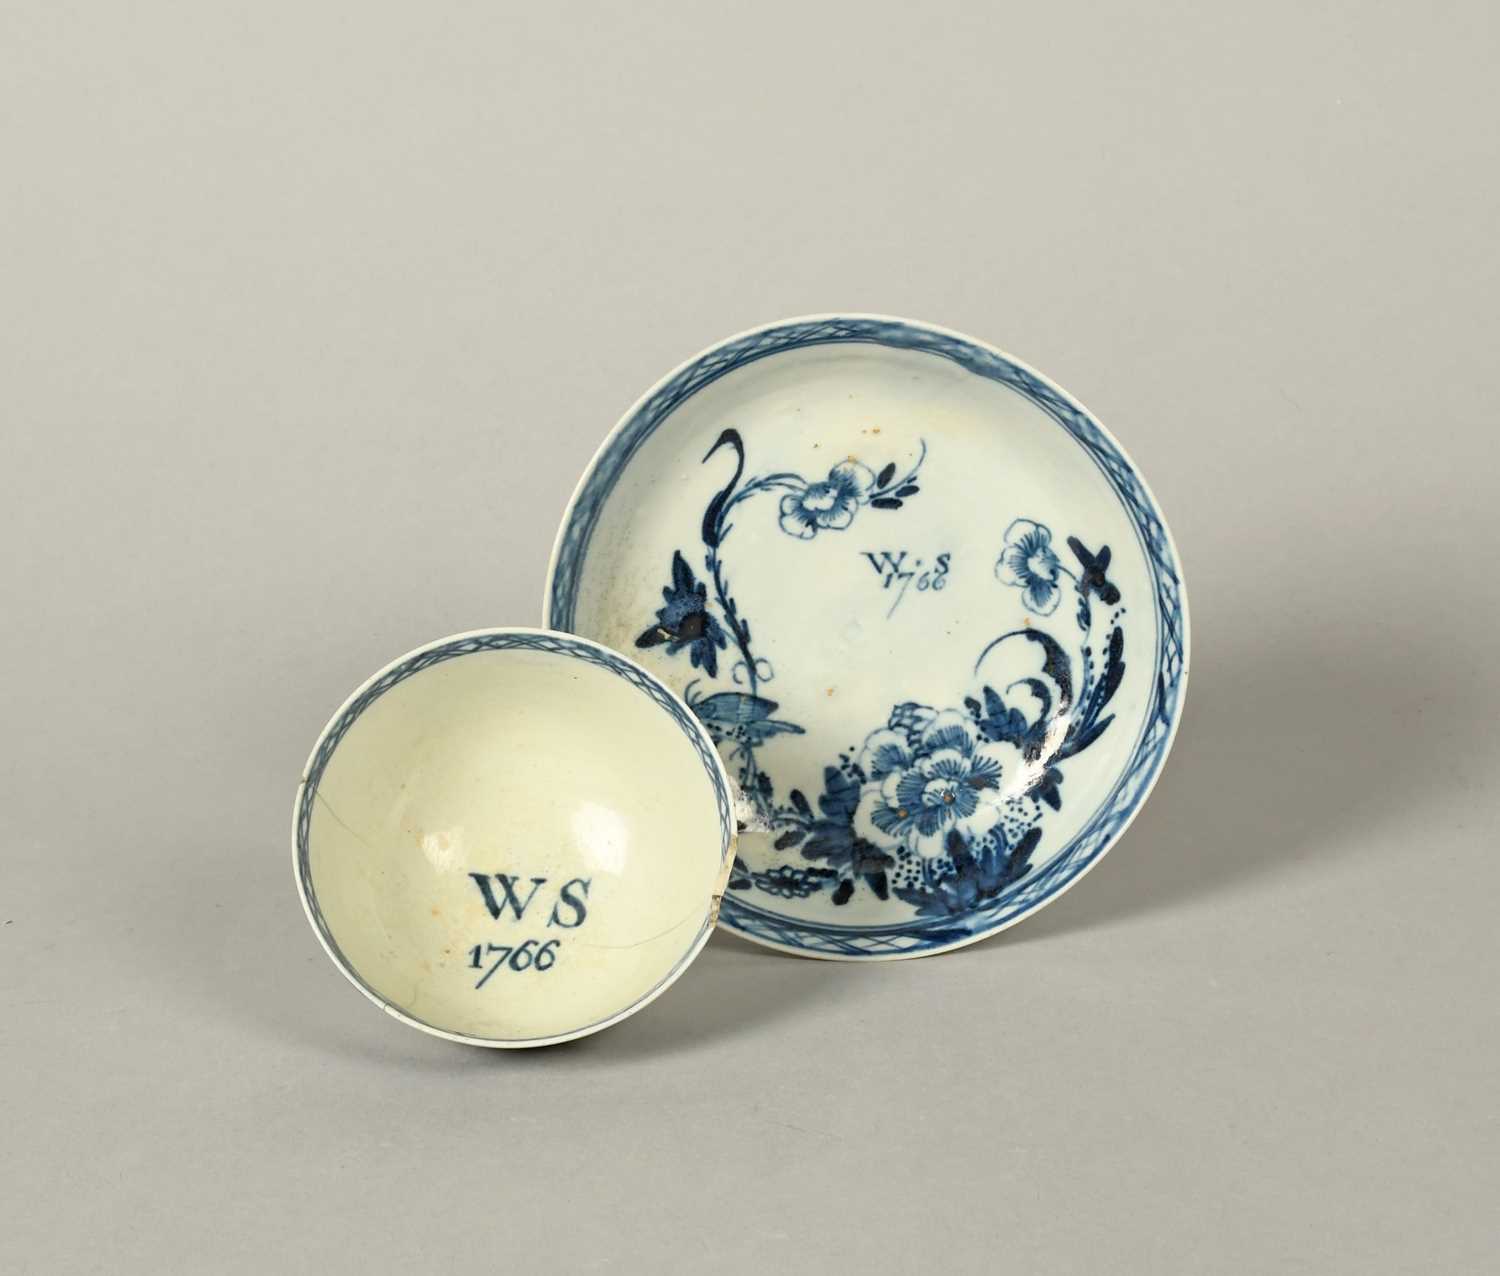 A Richard Chaffers (Liverpool) blue and white teabowl and saucer, dated 1766, painted with a small